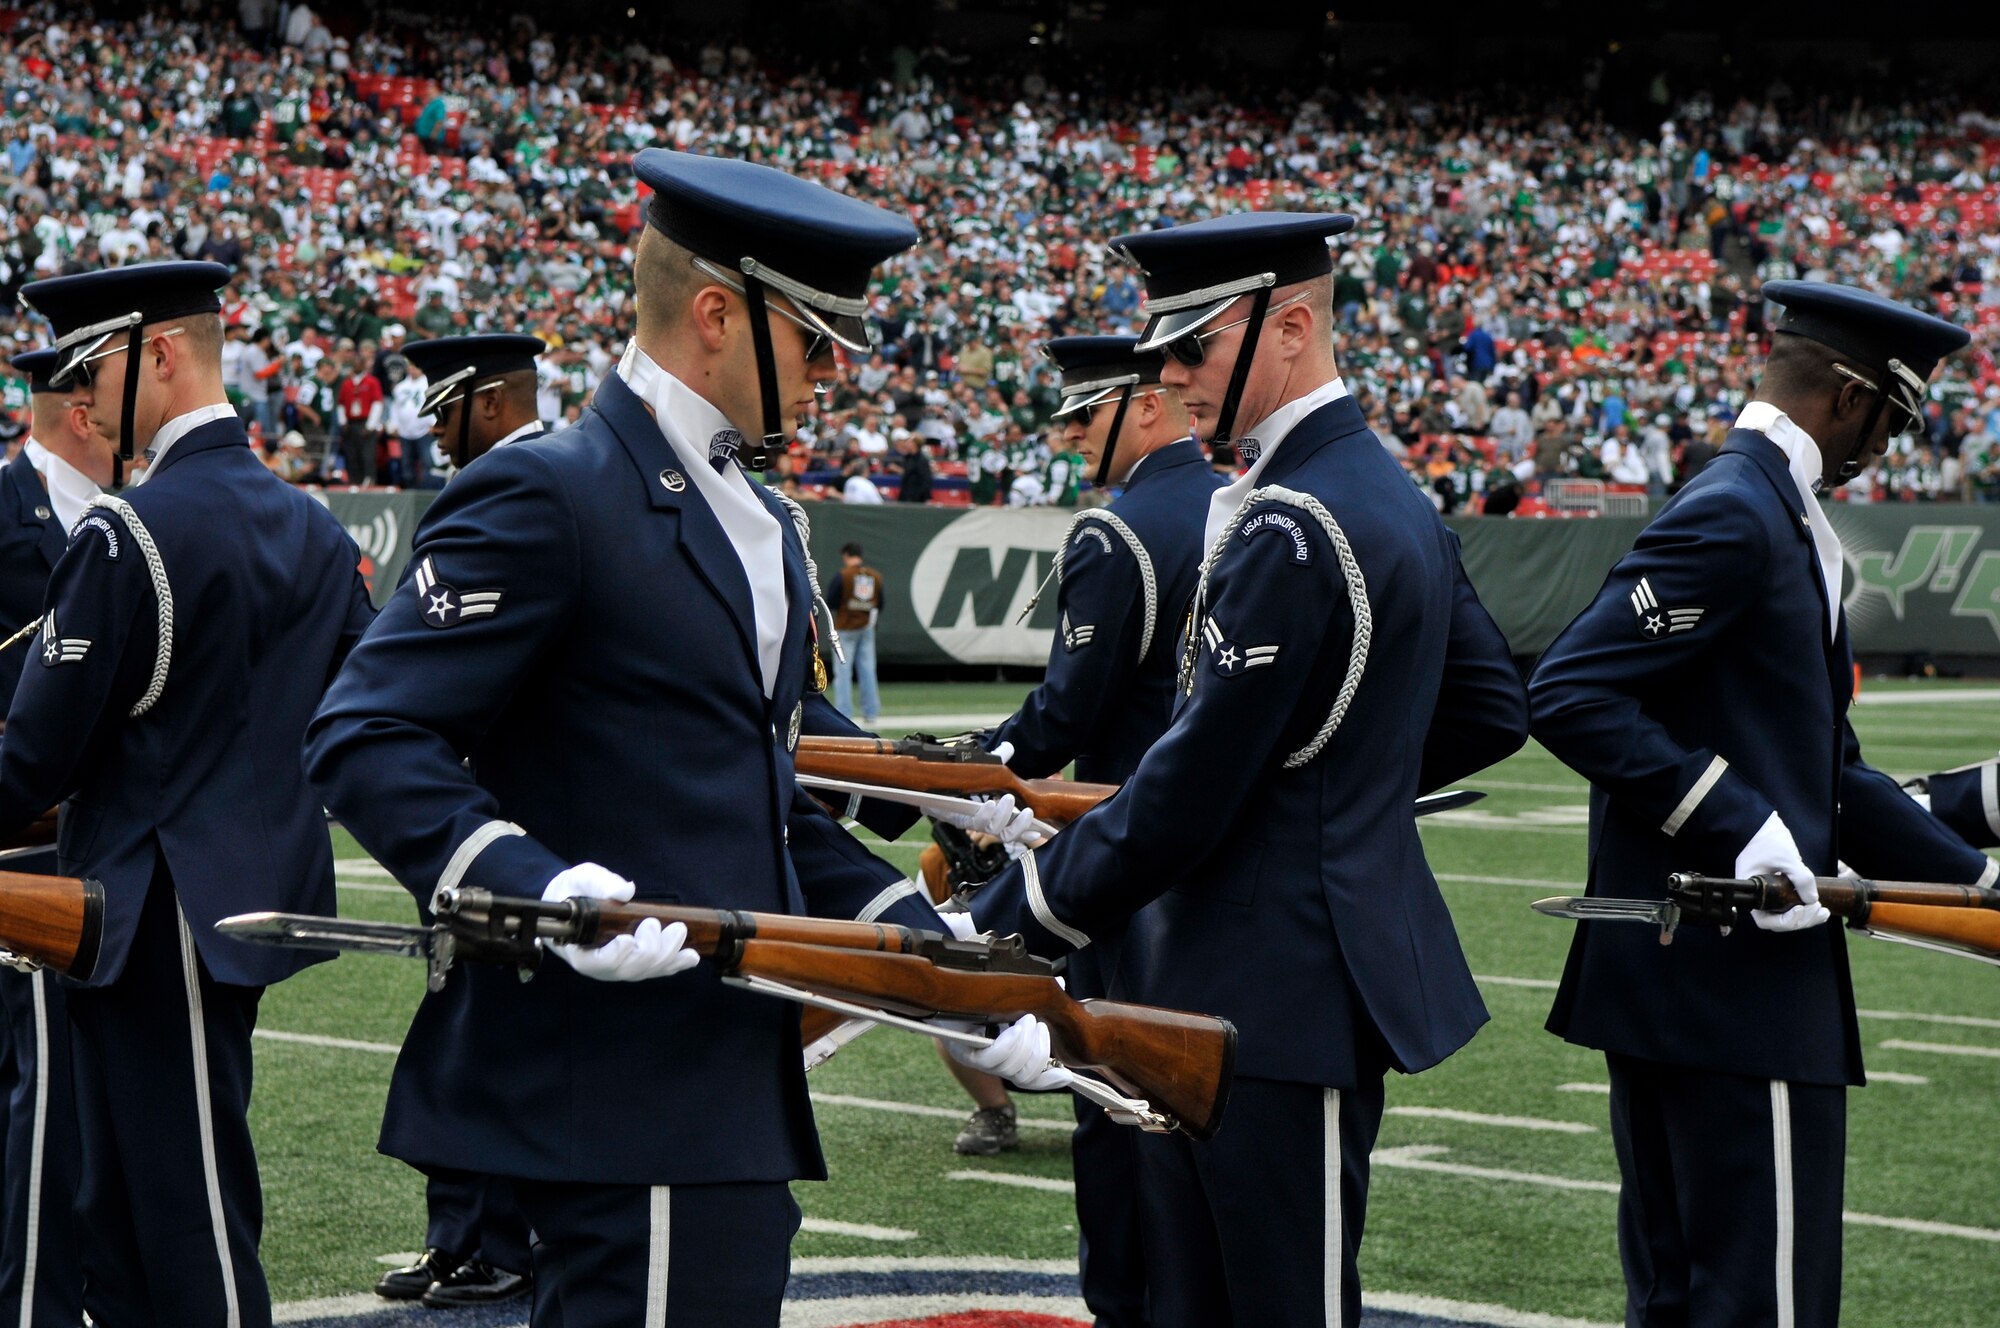 Airmen 1st Class Michael Courtright and Andrew Winders, United States Air Force Honor Guard Drill Team, simultaneously perform during the halftime show at a New York Jets football game against the Jacksonville Jaguars at Giants Stadium Nov. 15, in East Rutherford, New Jersey. The Drill Team tours worldwide to showcase Air Force precision and professionalism. During the Air Force Honor Guard's 60-year history, their traveling component, the Drill Team, has performed in every state of the union and many countries abroad. (U.S. Air Force photo/Senior Airman Marleah Miller)